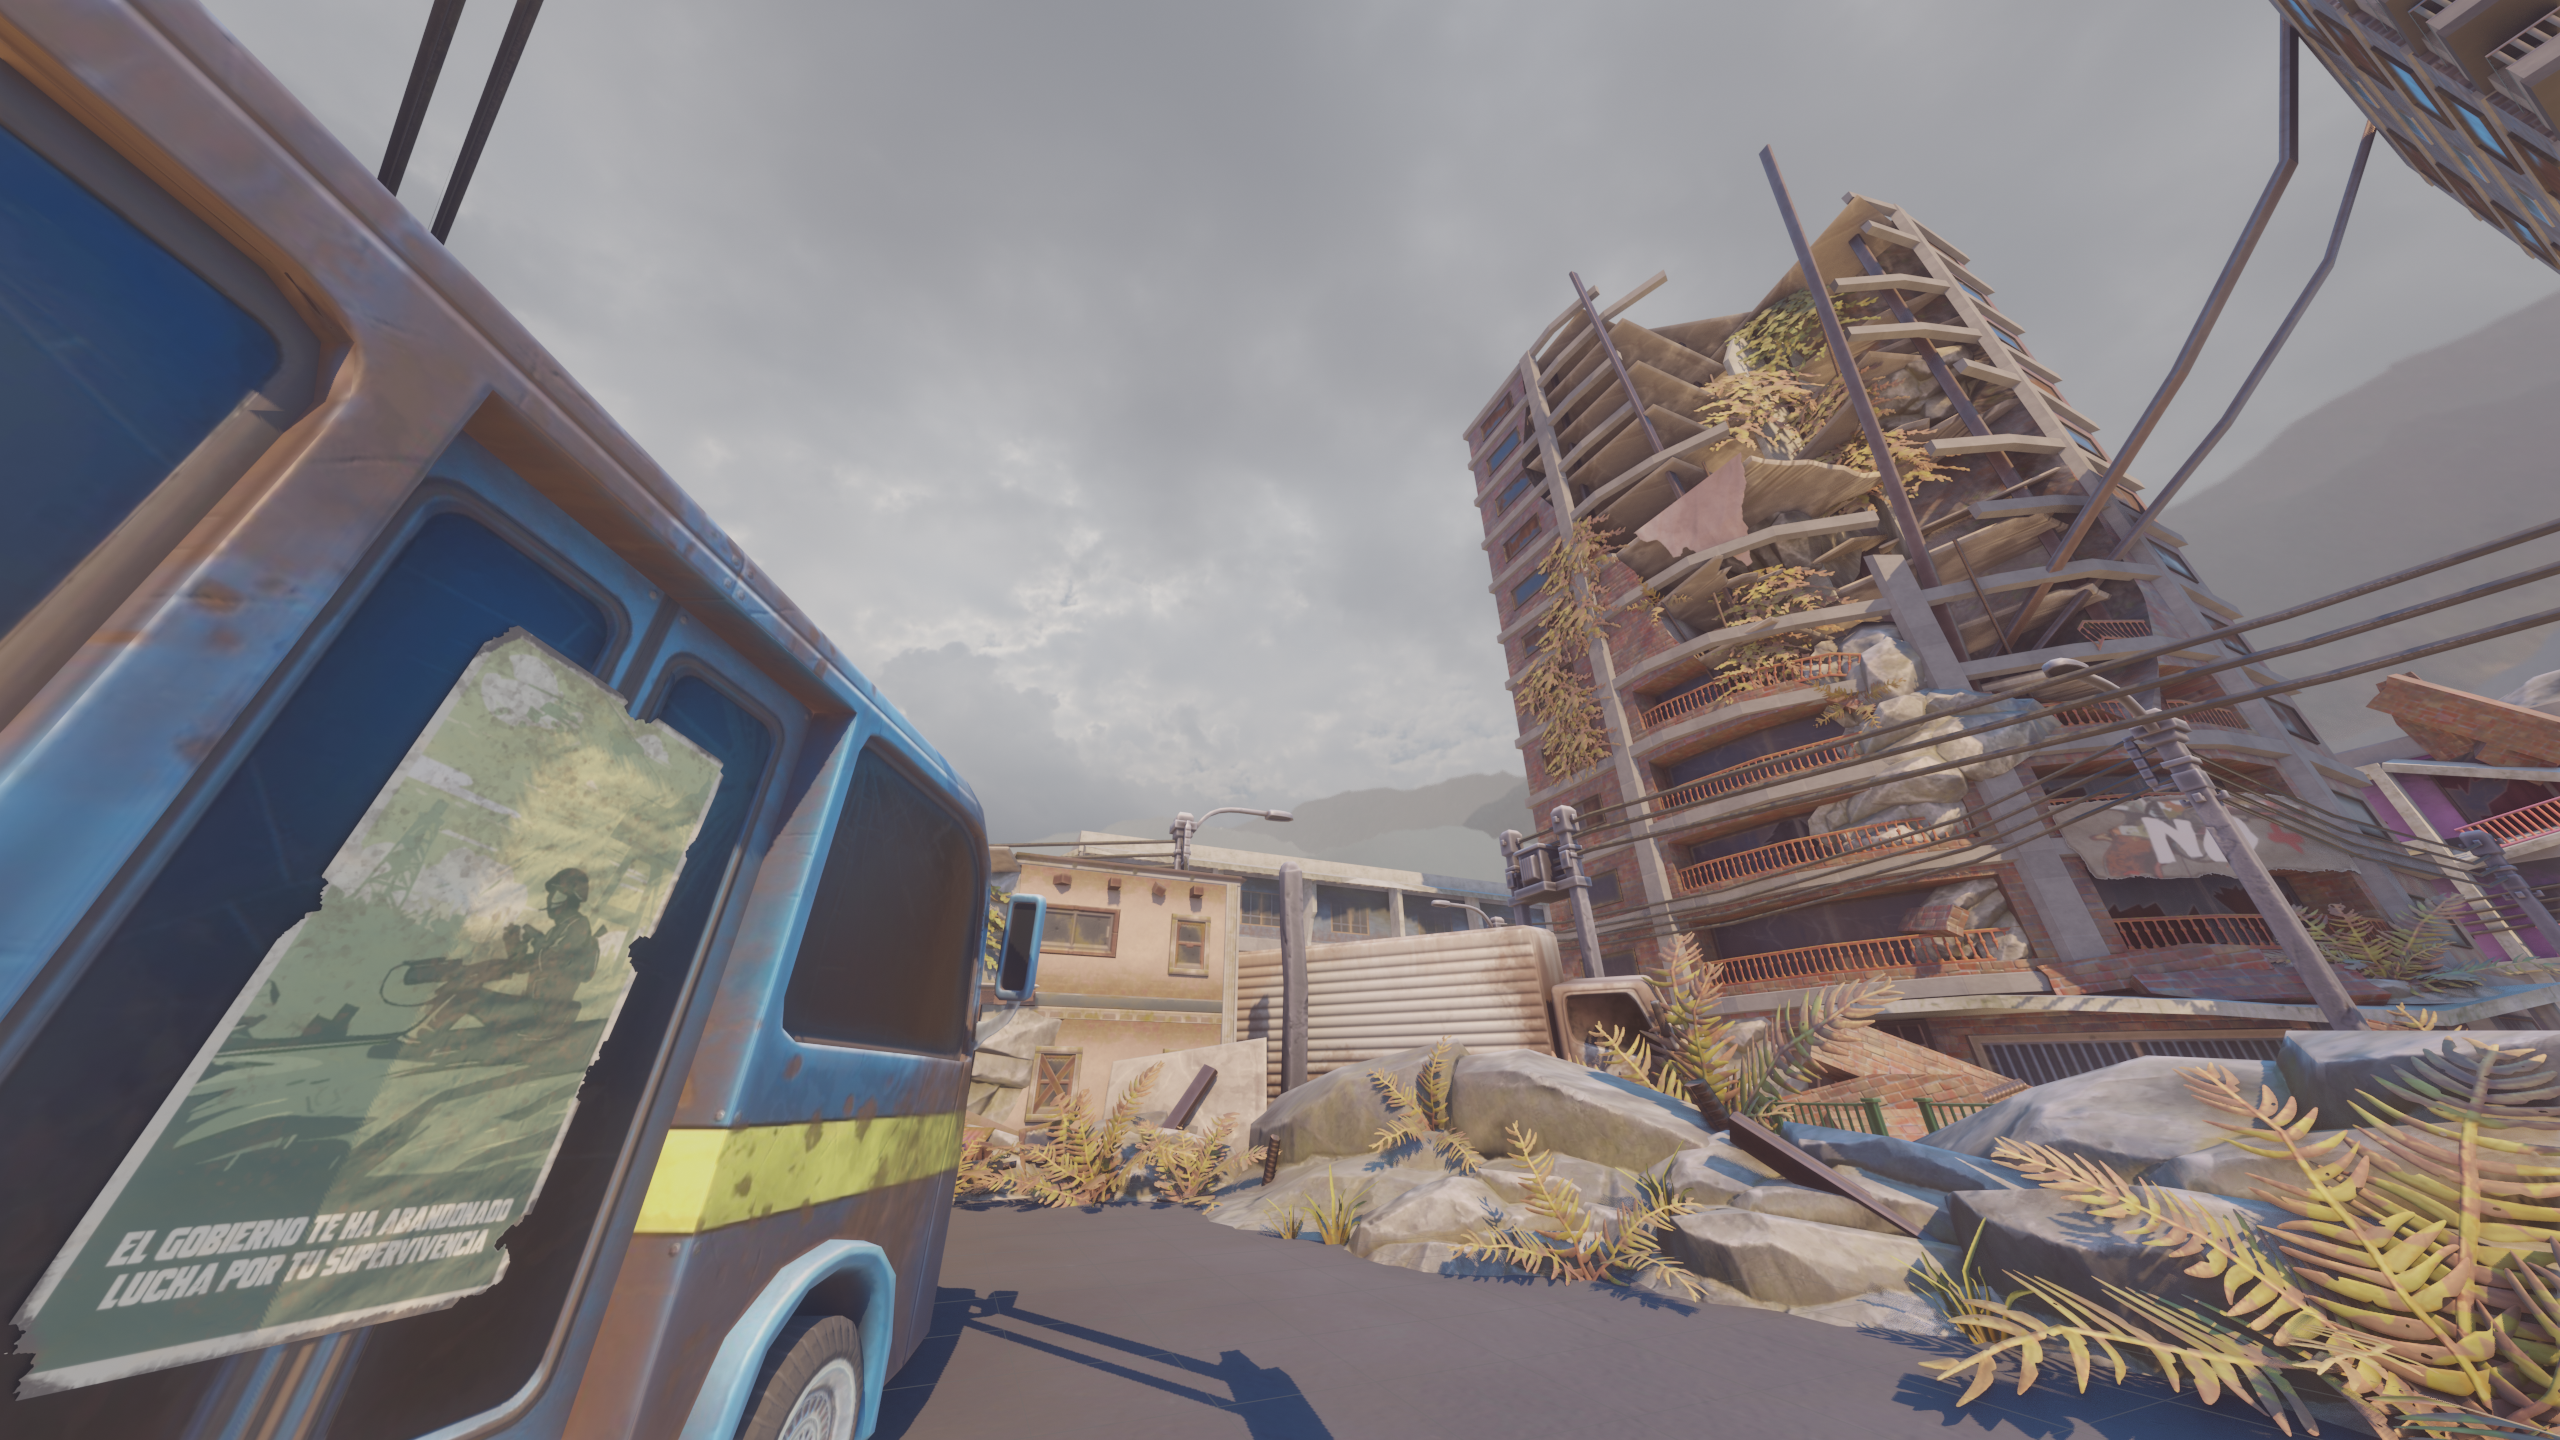 WAR IN ARMS: PRIME FORCES CQB screenshot game